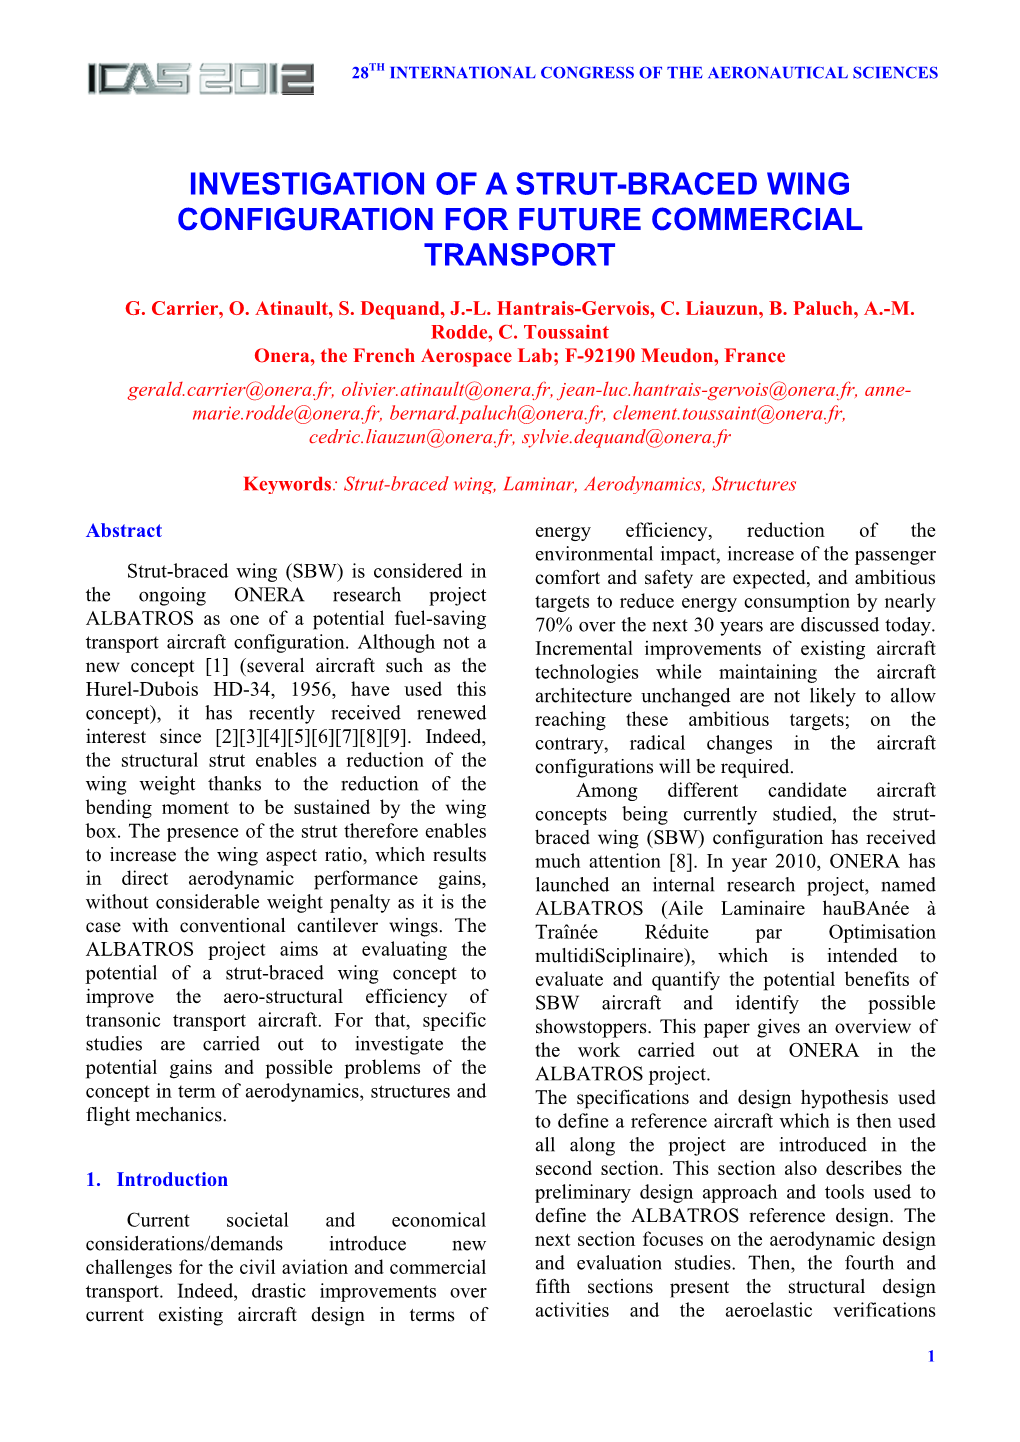 Investigation of a Strut-Braced Wing Configuration for Future Commercial Transport